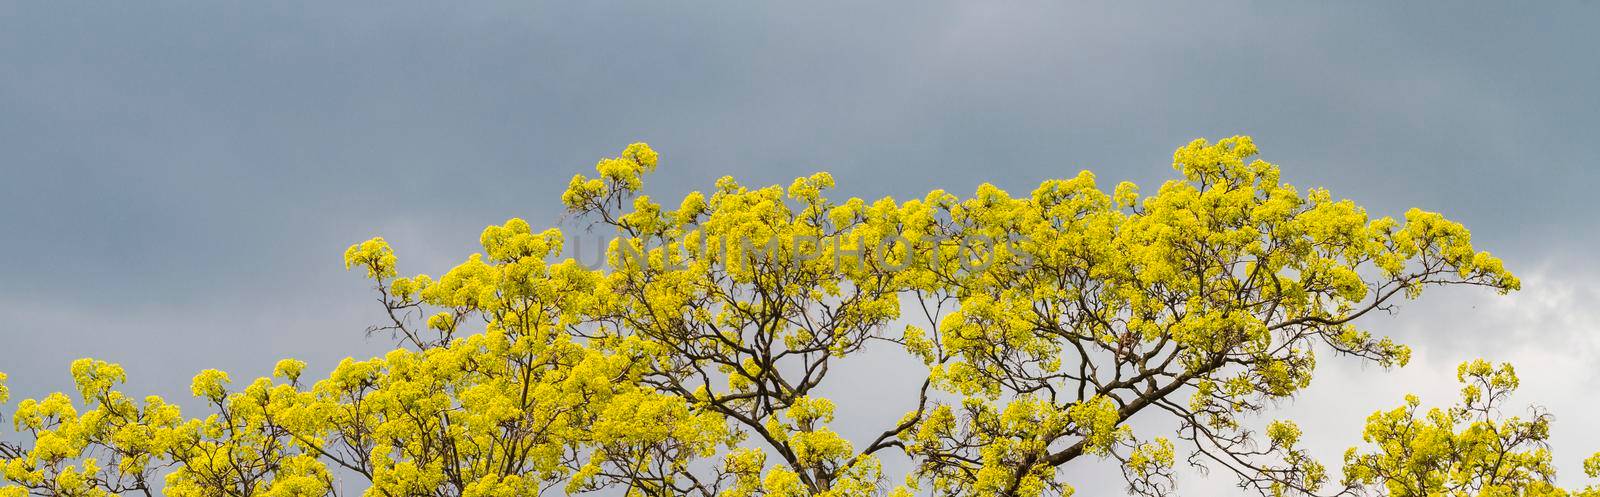 tree blossoms in yellow against a gray sky by drakuliren